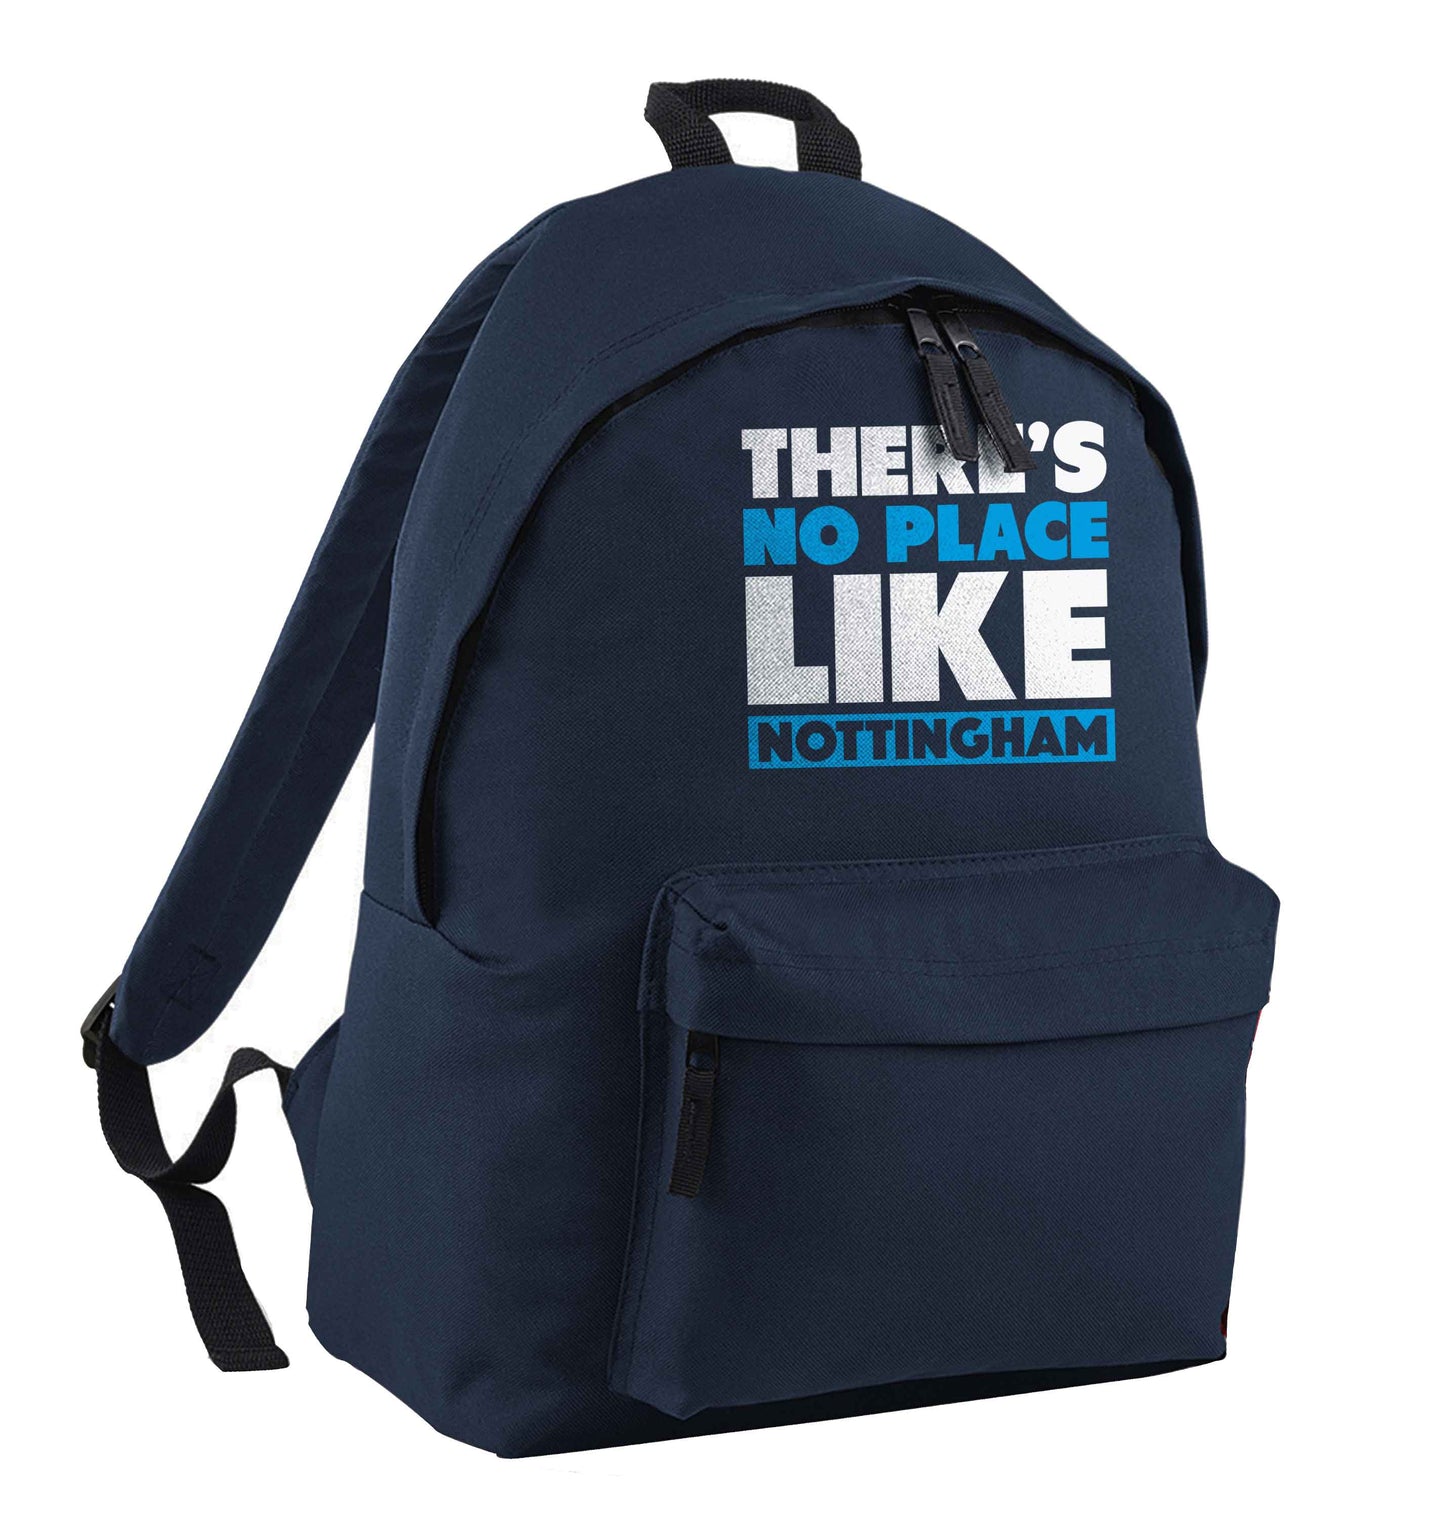 There's no place like Nottingham navy adults backpack